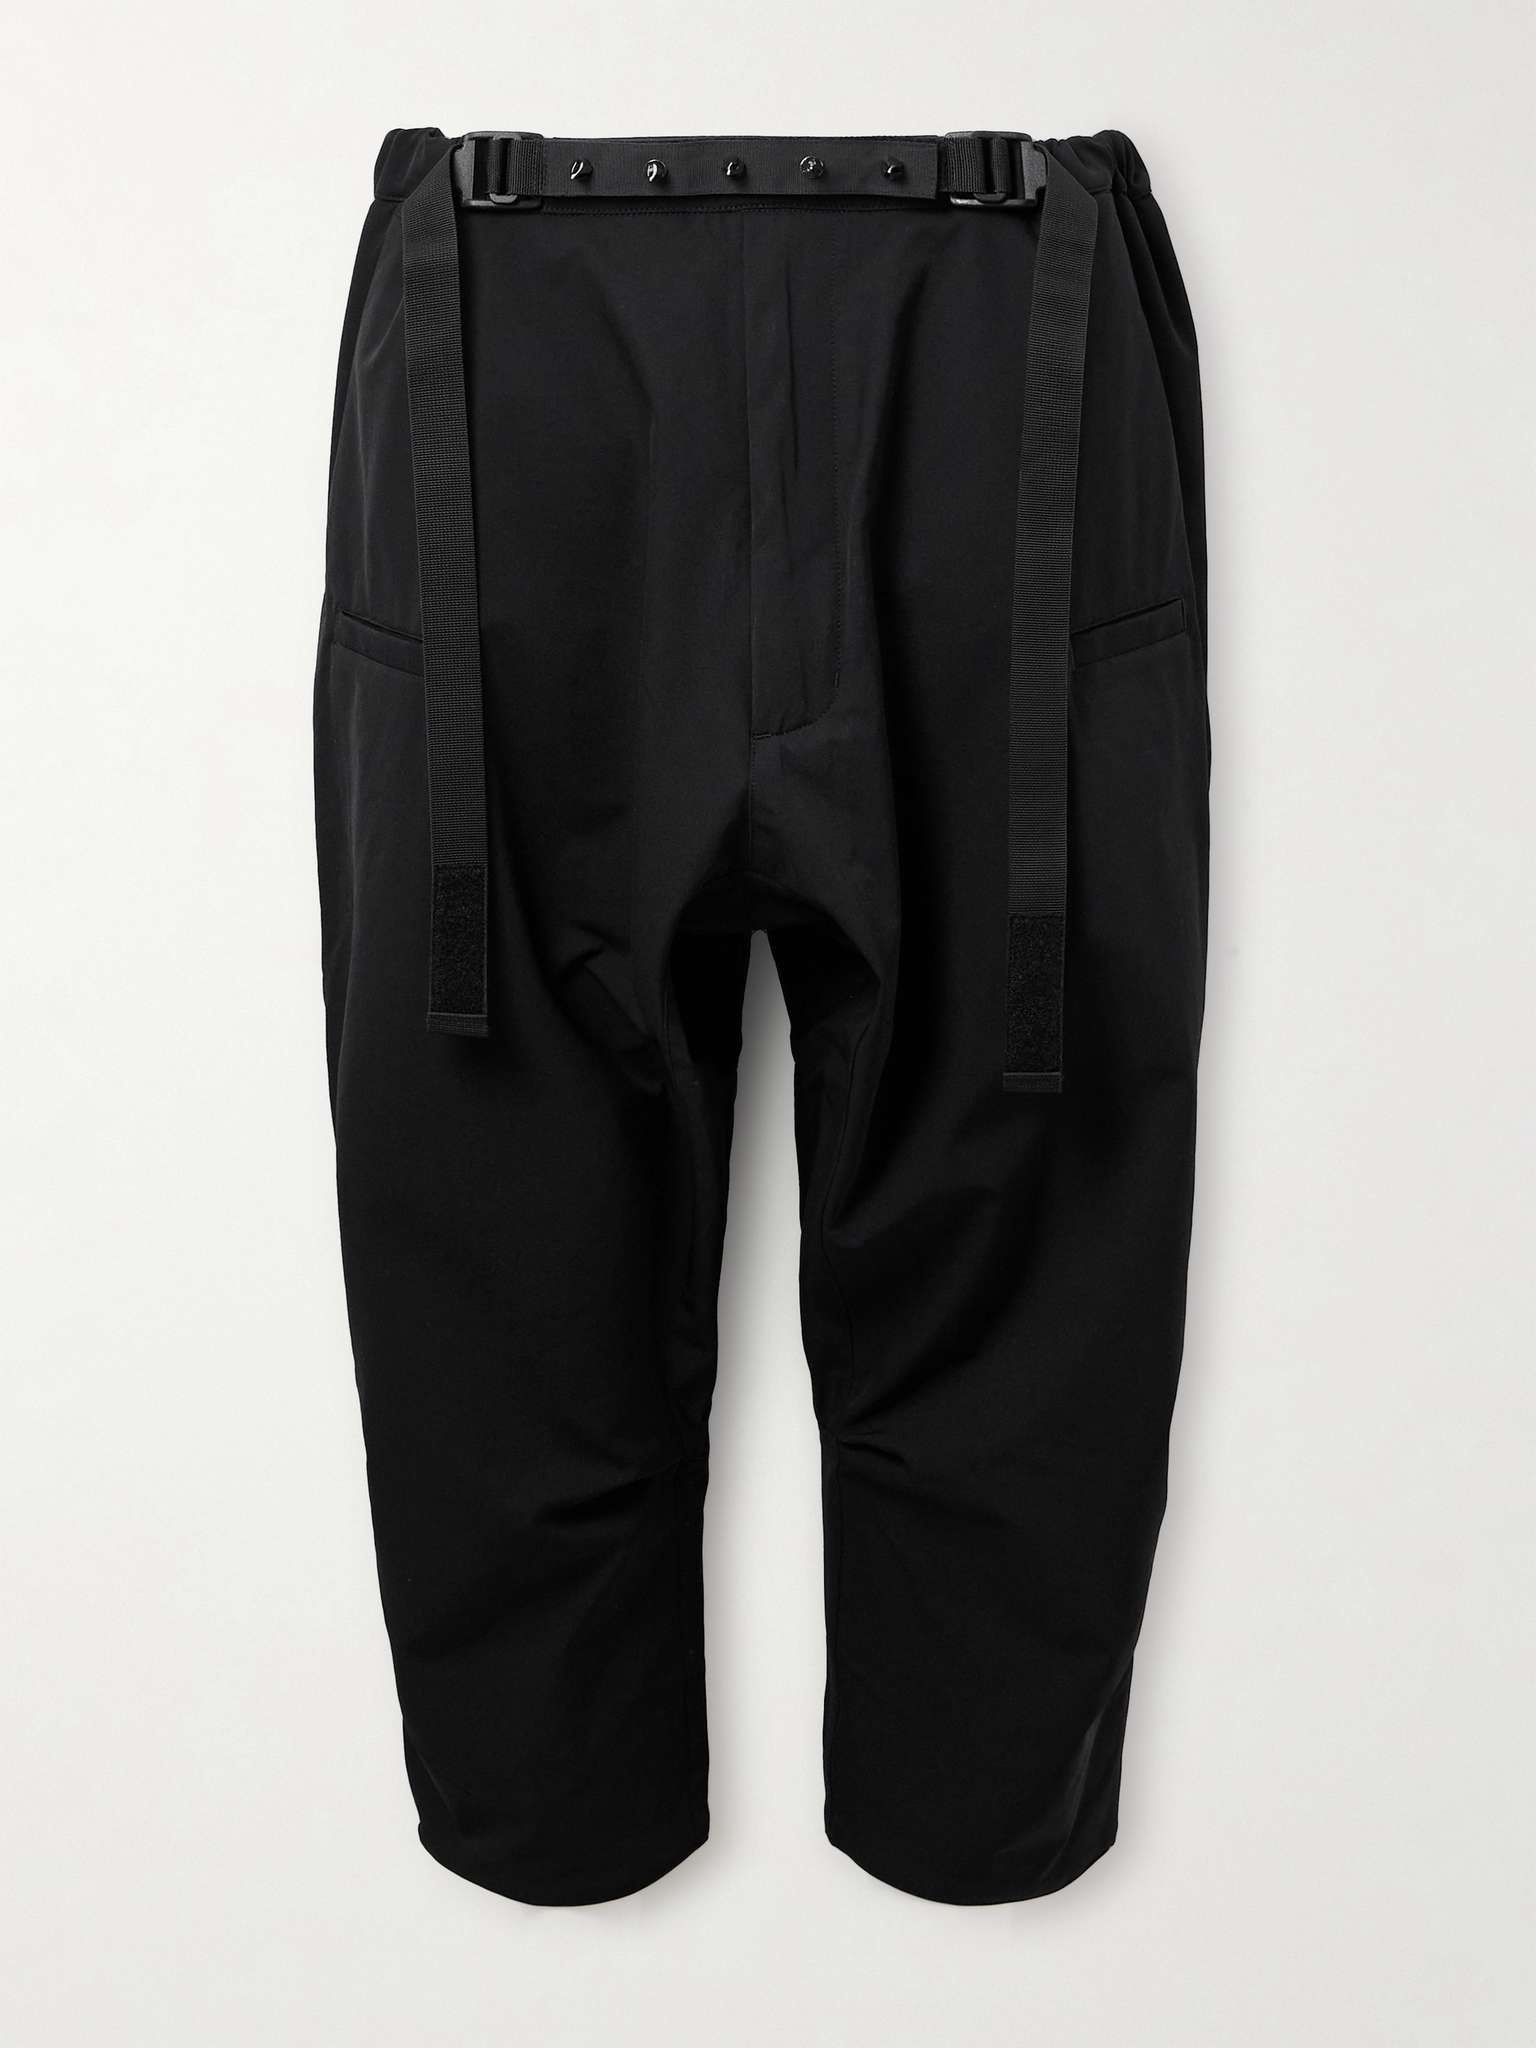 P17-DS Cropped Spiked Belted schoeller® Dryskin™ Trousers - 1